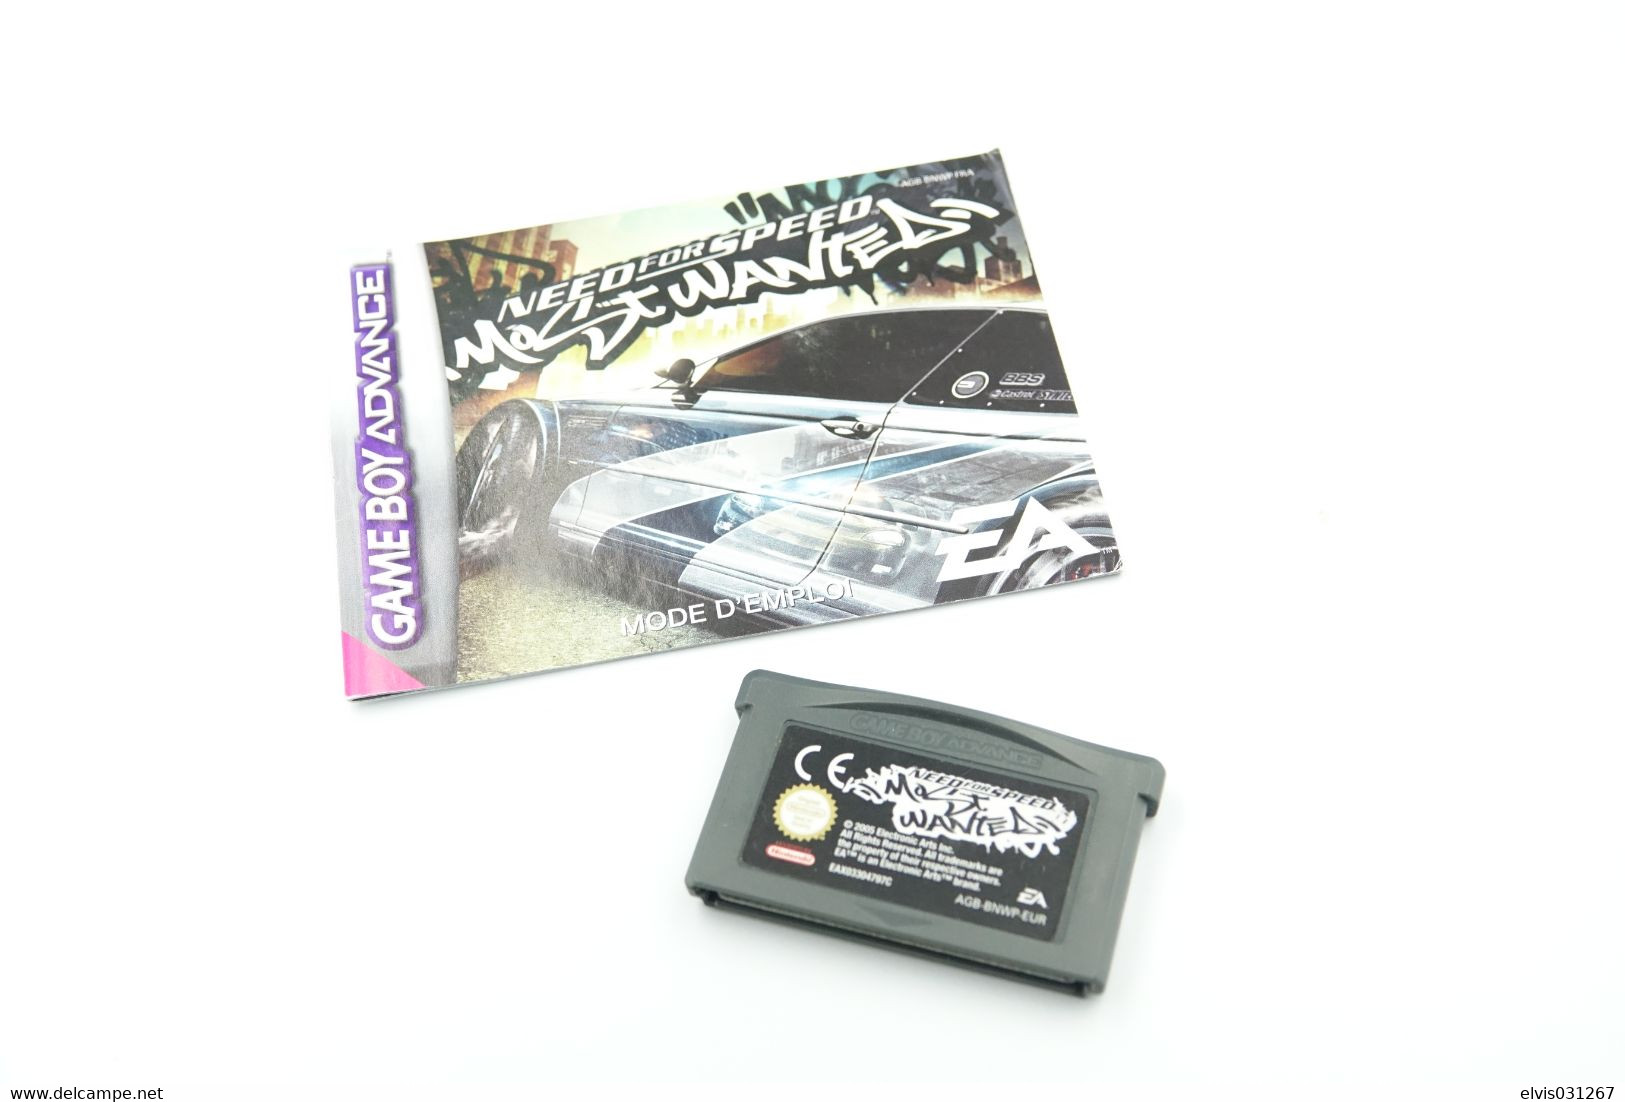 NINTENDO GAMEBOY ADVANCE: NEED FOR SPEED MOST WANTED WITH BOOKLET - EA - 2005 - Game Boy Advance